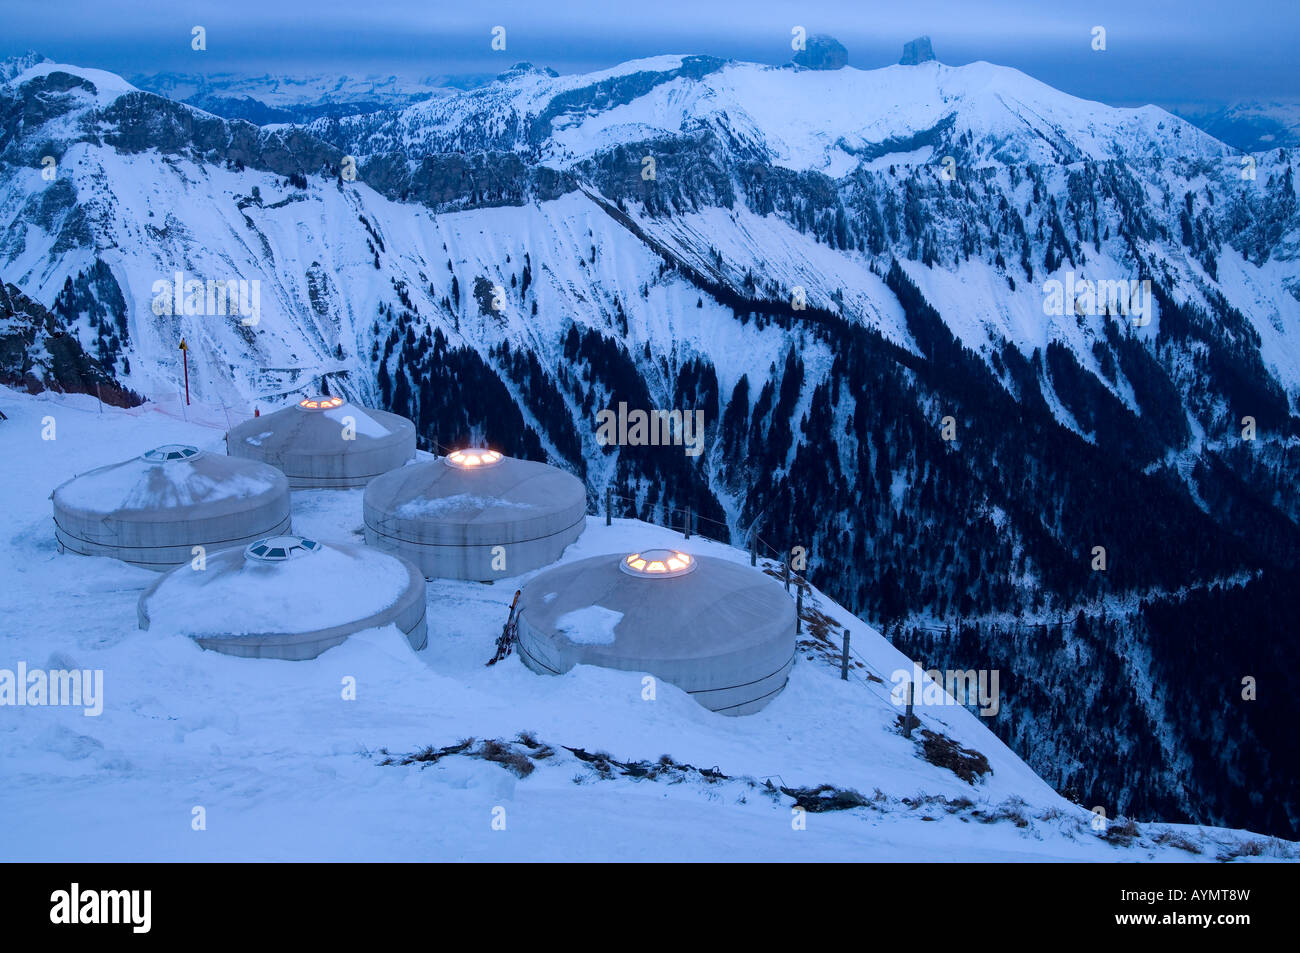 View of some tents in the peak of Rochers de Naye, in the Swiss Alps, central Europe,  with mountains in the background at dusk Stock Photo